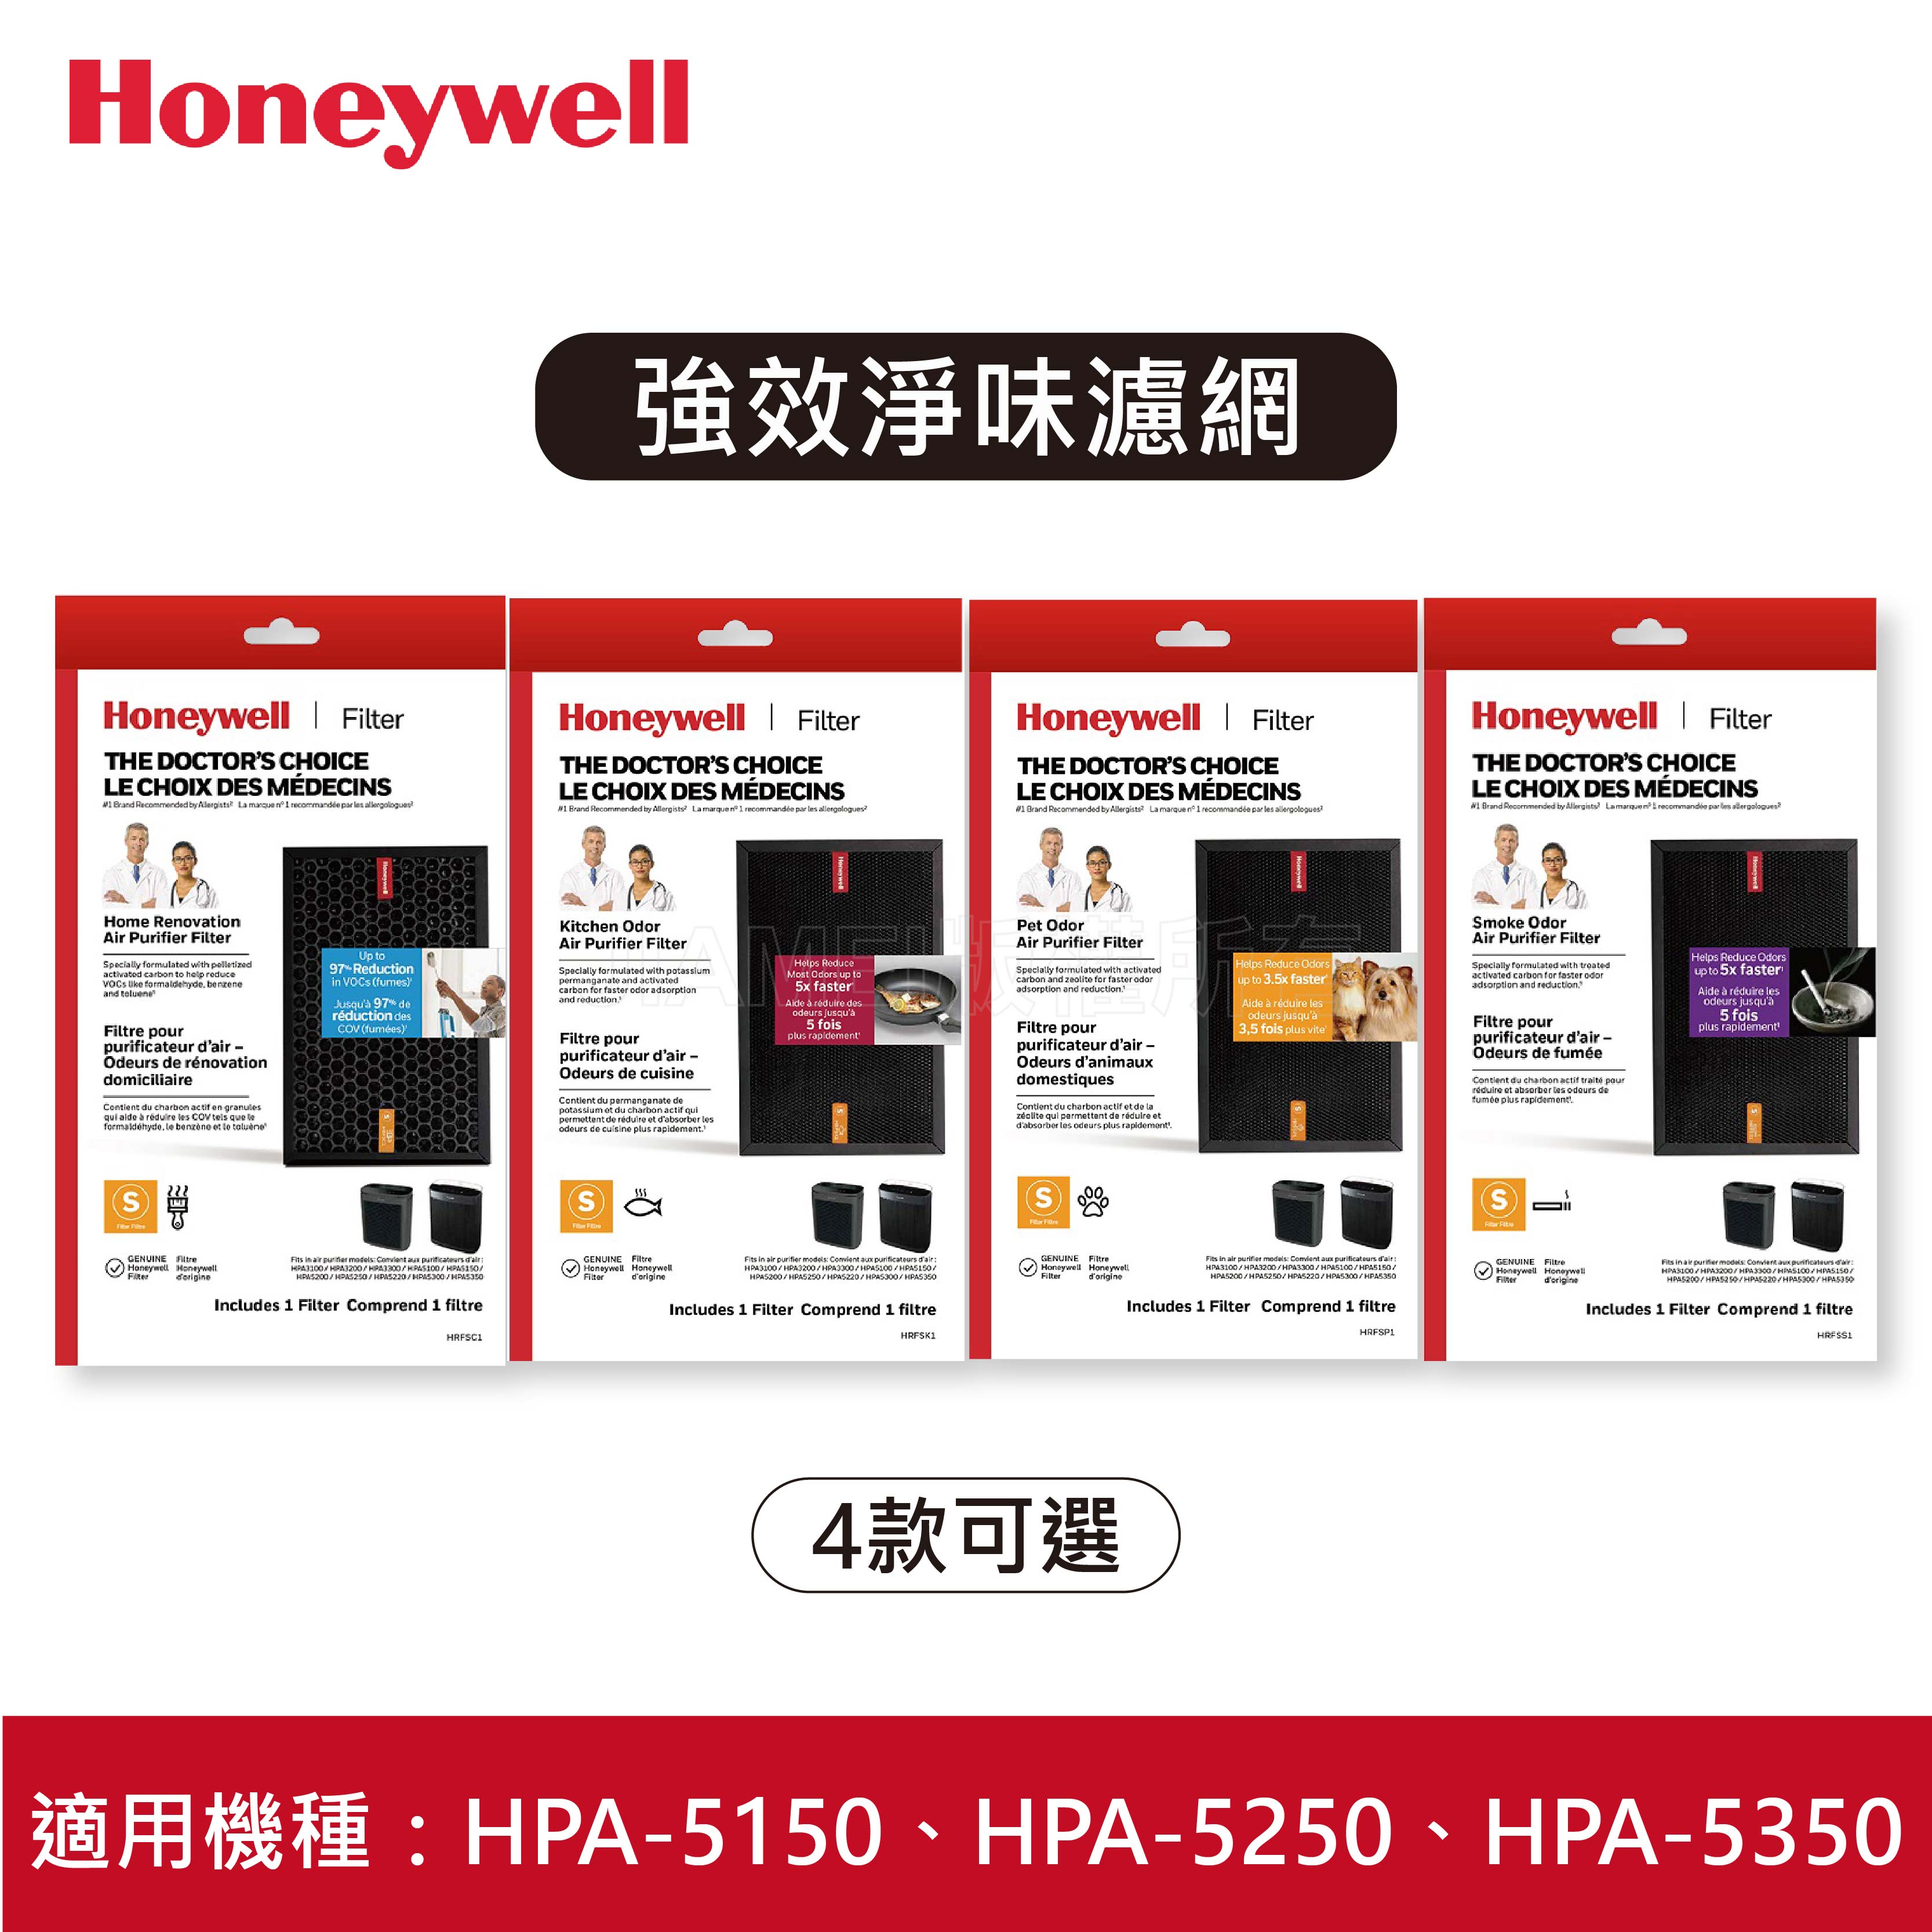 【Honeywell】強效淨味濾網 家居/廚房/寵物/煙霧 適用HPA5150TW HPA5250TW HPA5350T